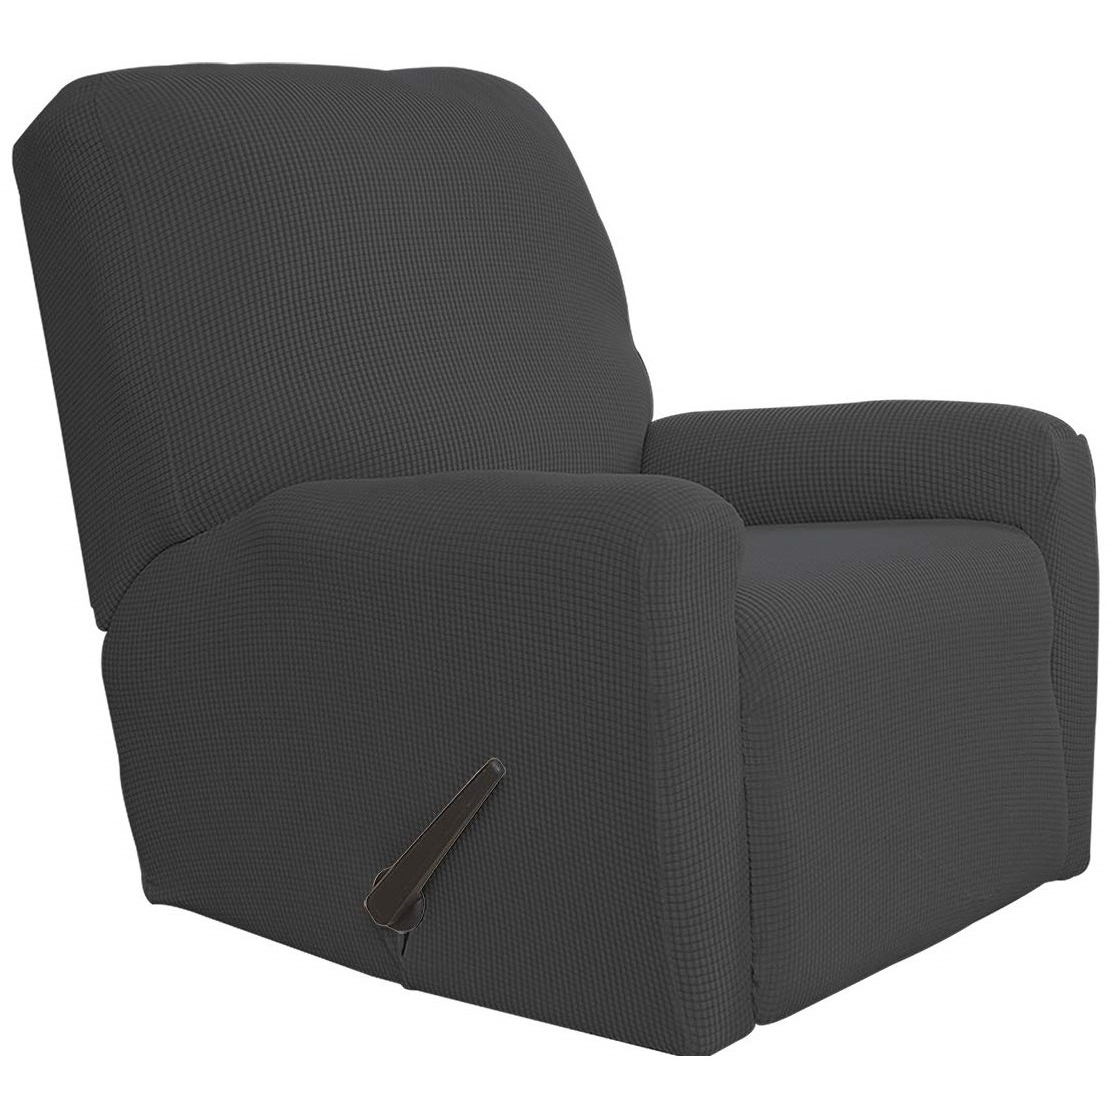 Easy-Going Stretch Recliner Slipcover